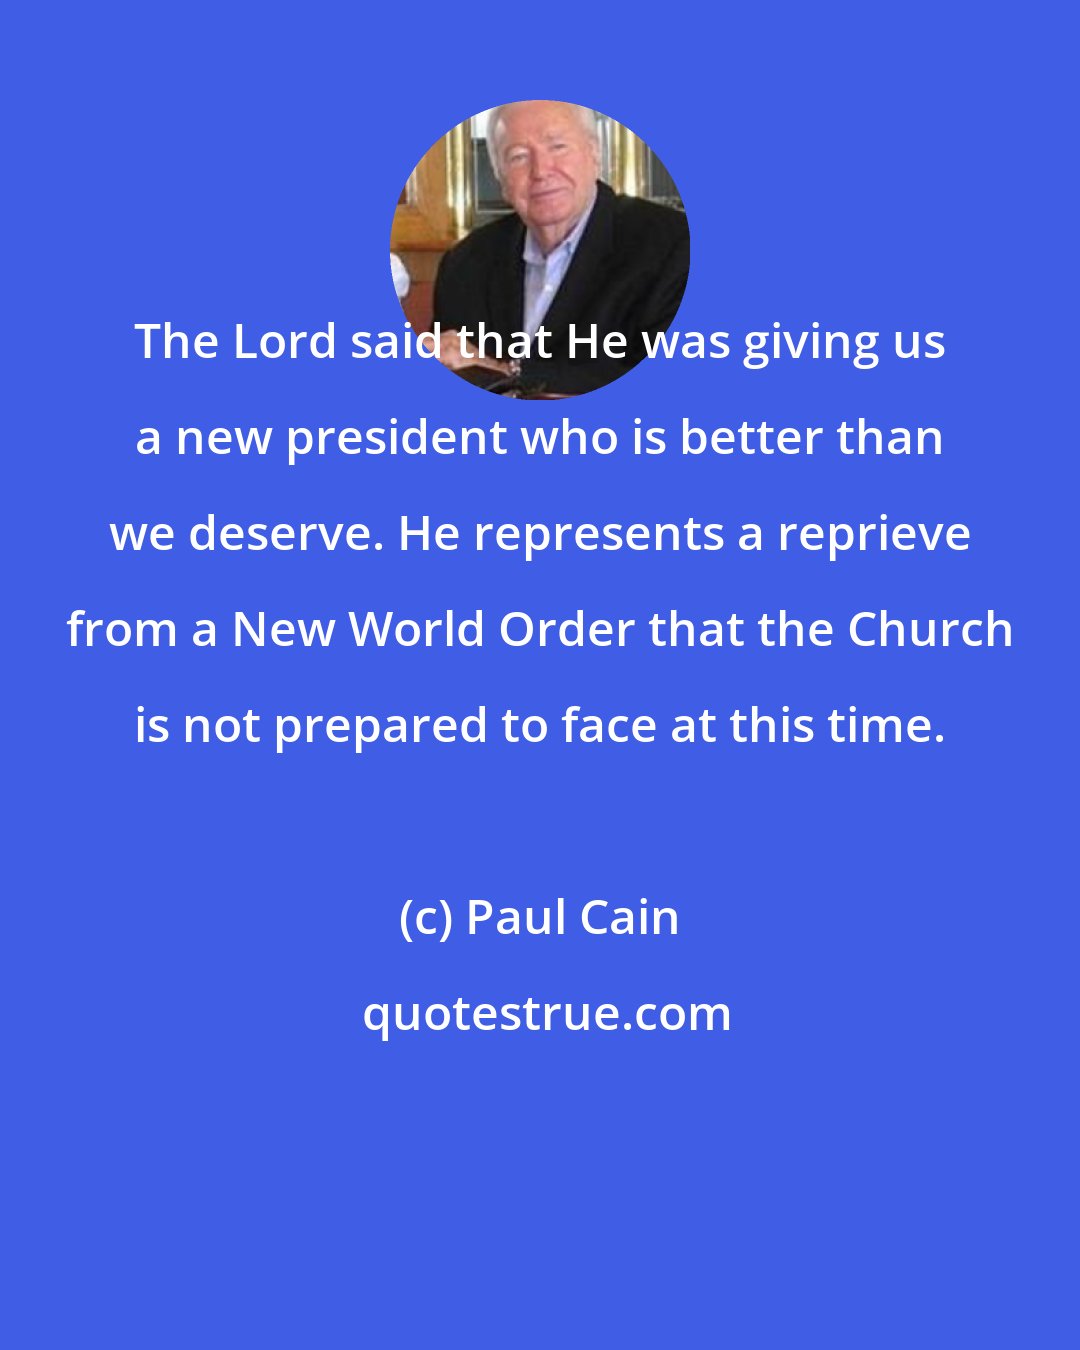 Paul Cain: The Lord said that He was giving us a new president who is better than we deserve. He represents a reprieve from a New World Order that the Church is not prepared to face at this time.